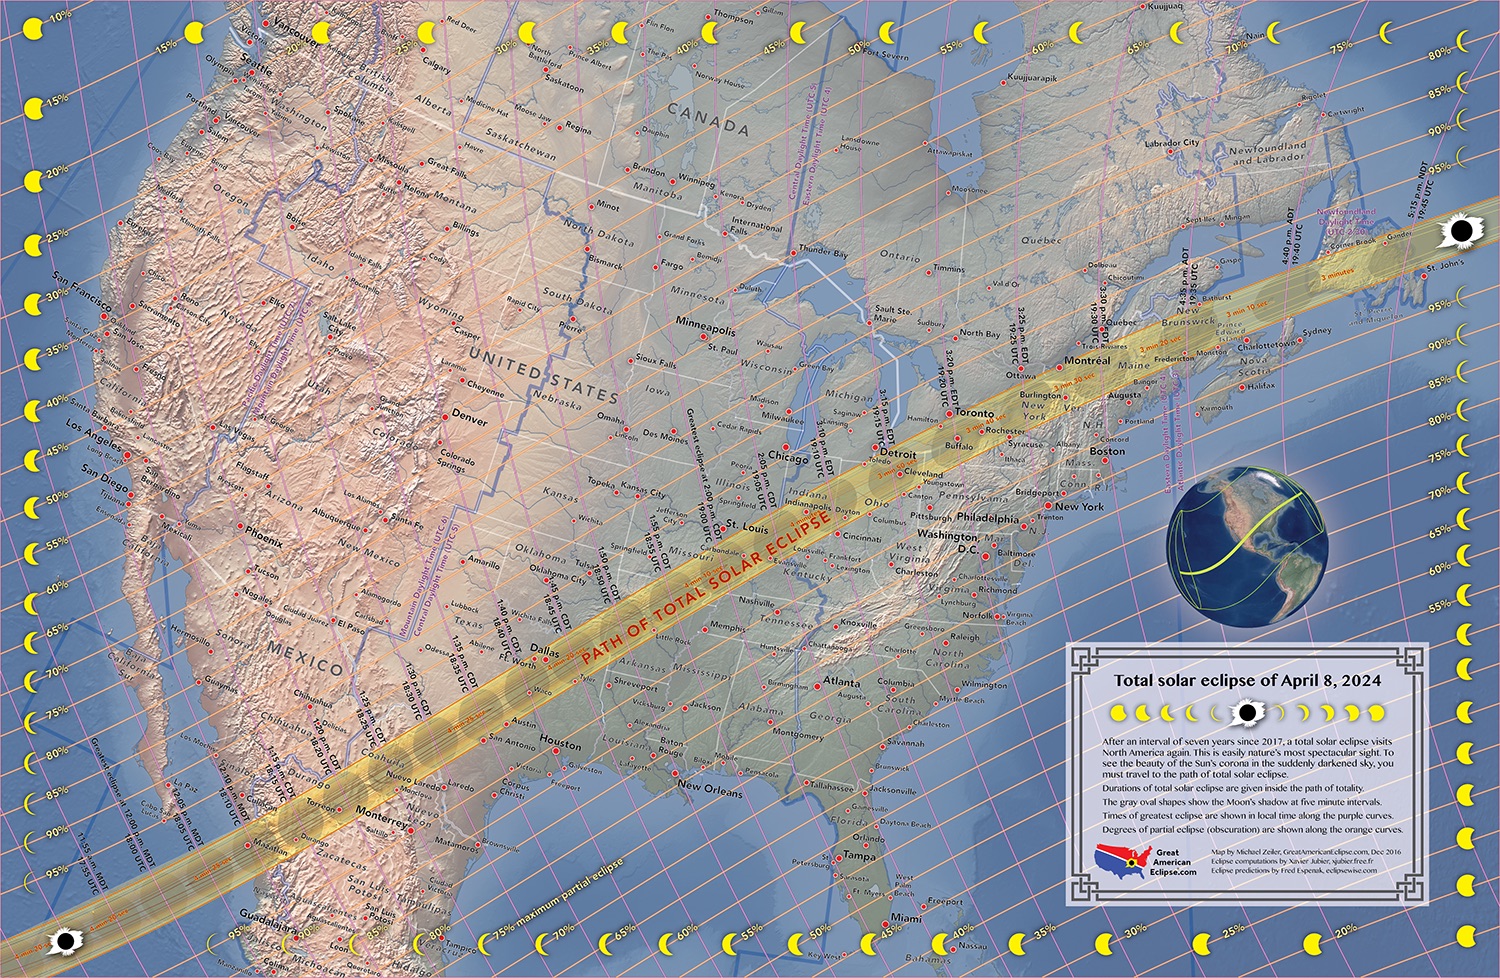 A total solar eclipse will be visible on April 8, 2024, over Mexico, the United States and Canada.